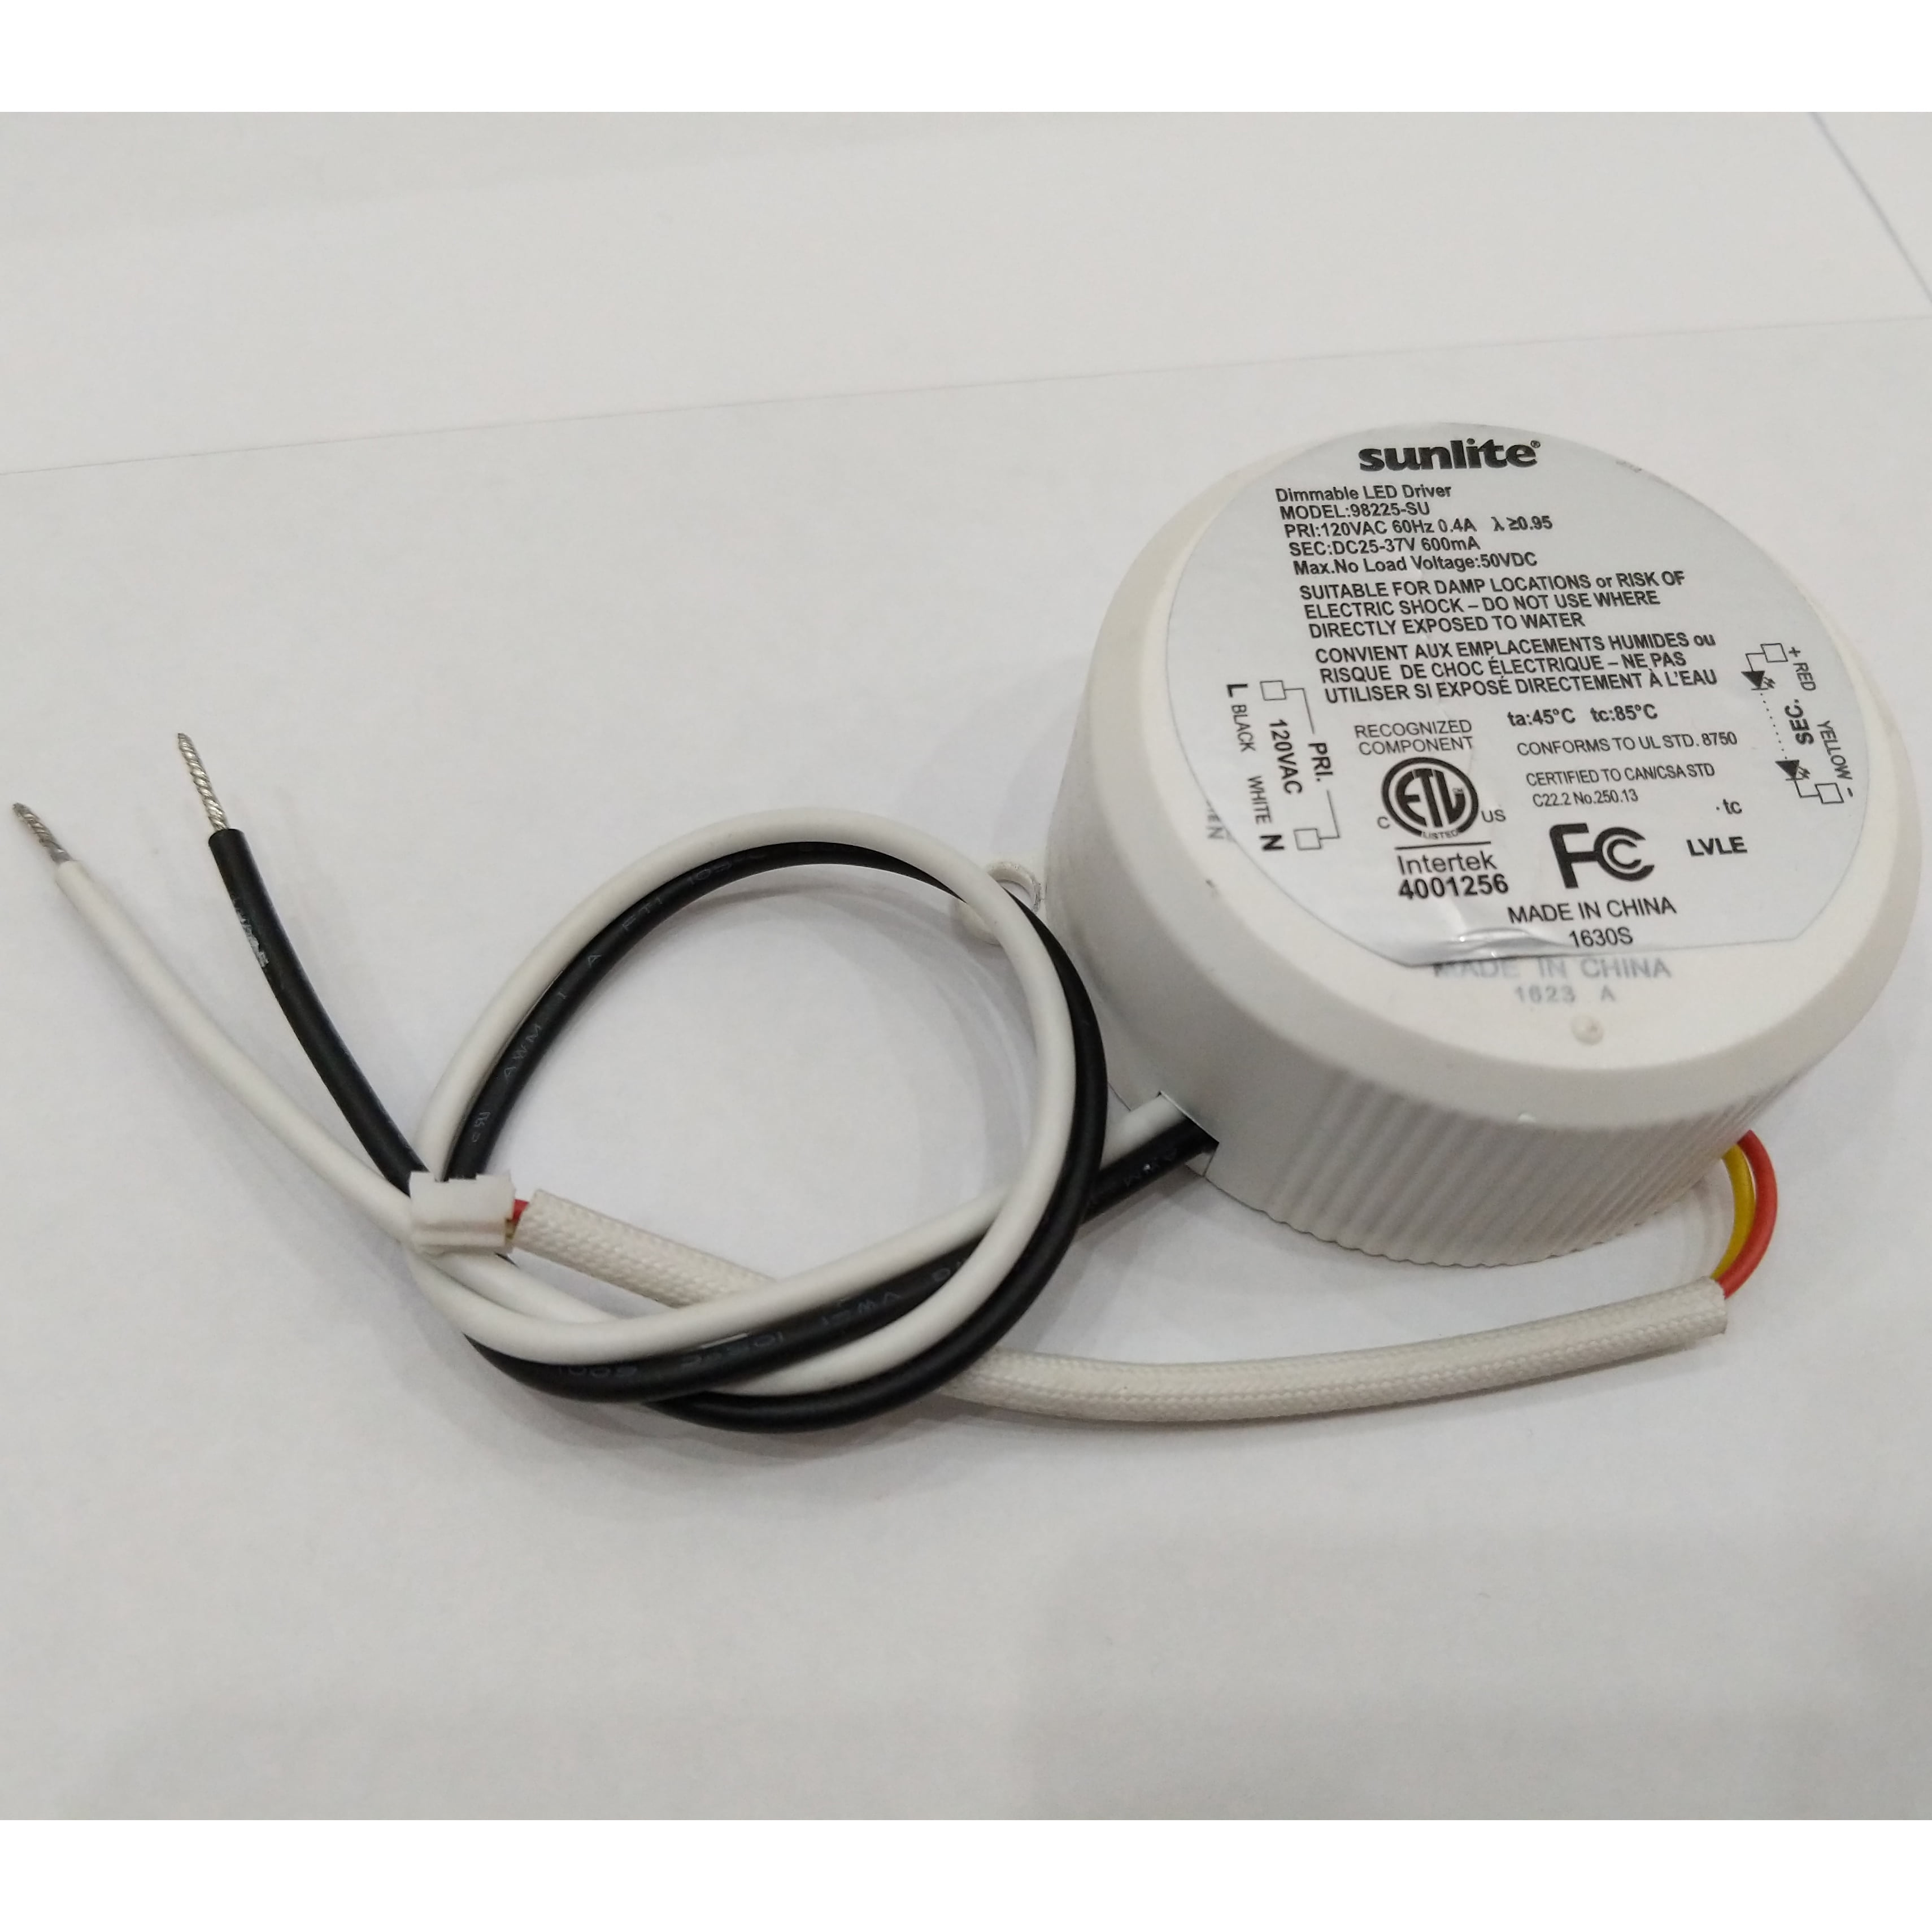 600mA CURRENT DIMMABLE LED DRIVER SUN - Walmart.com